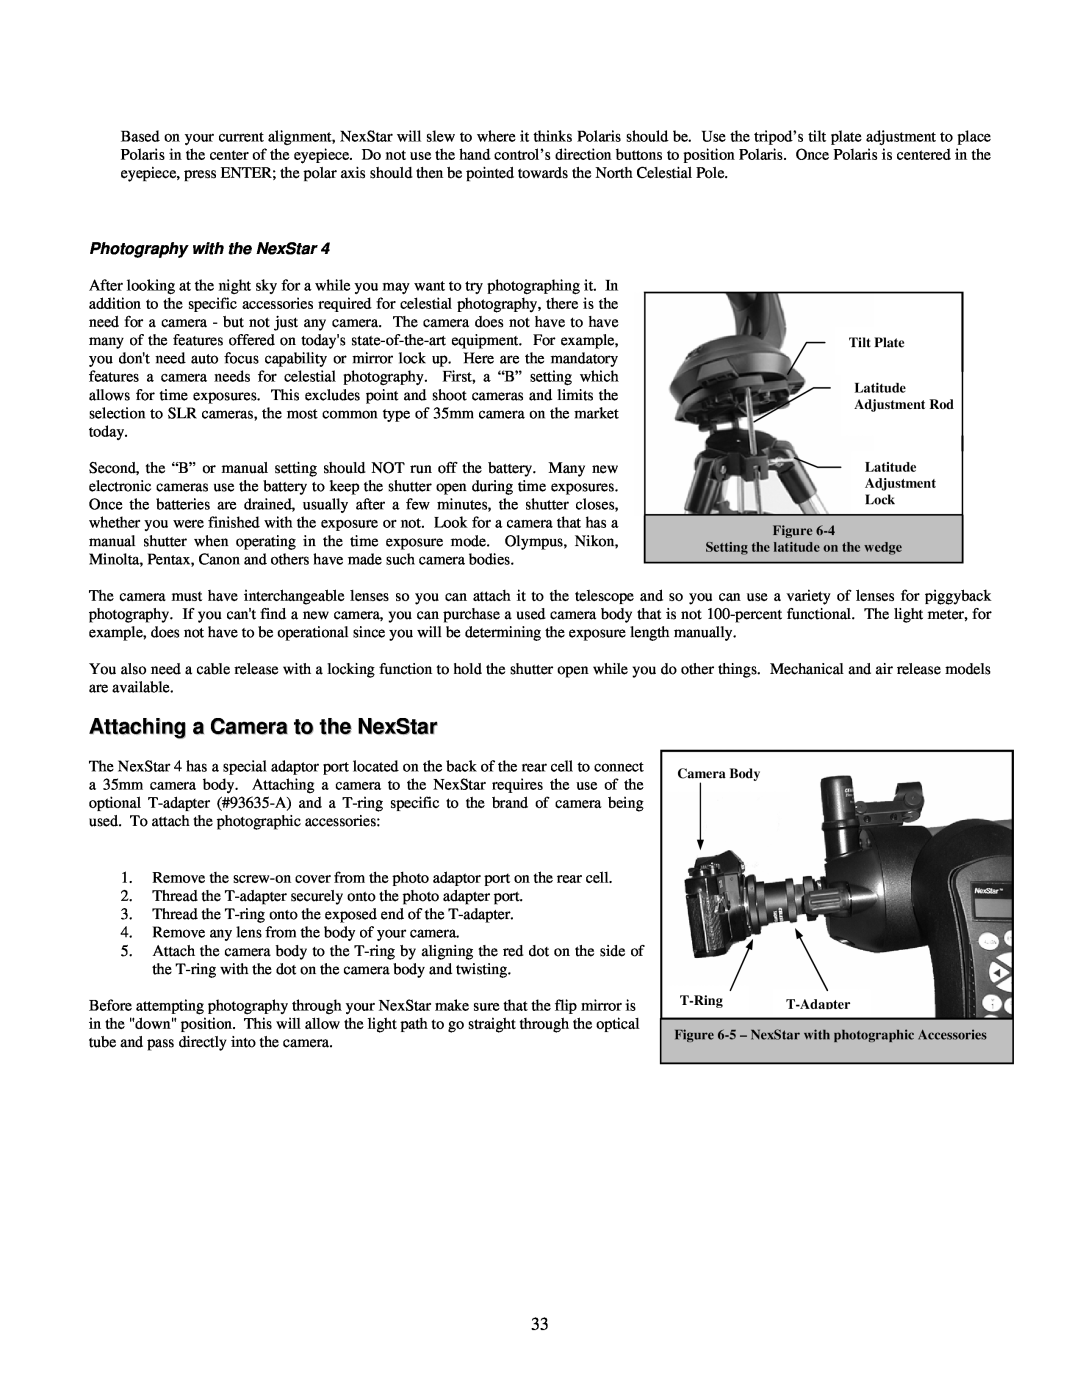 Celestron 4SE instruction manual Attaching a Camera to the NexStar, Photography with the NexStar 